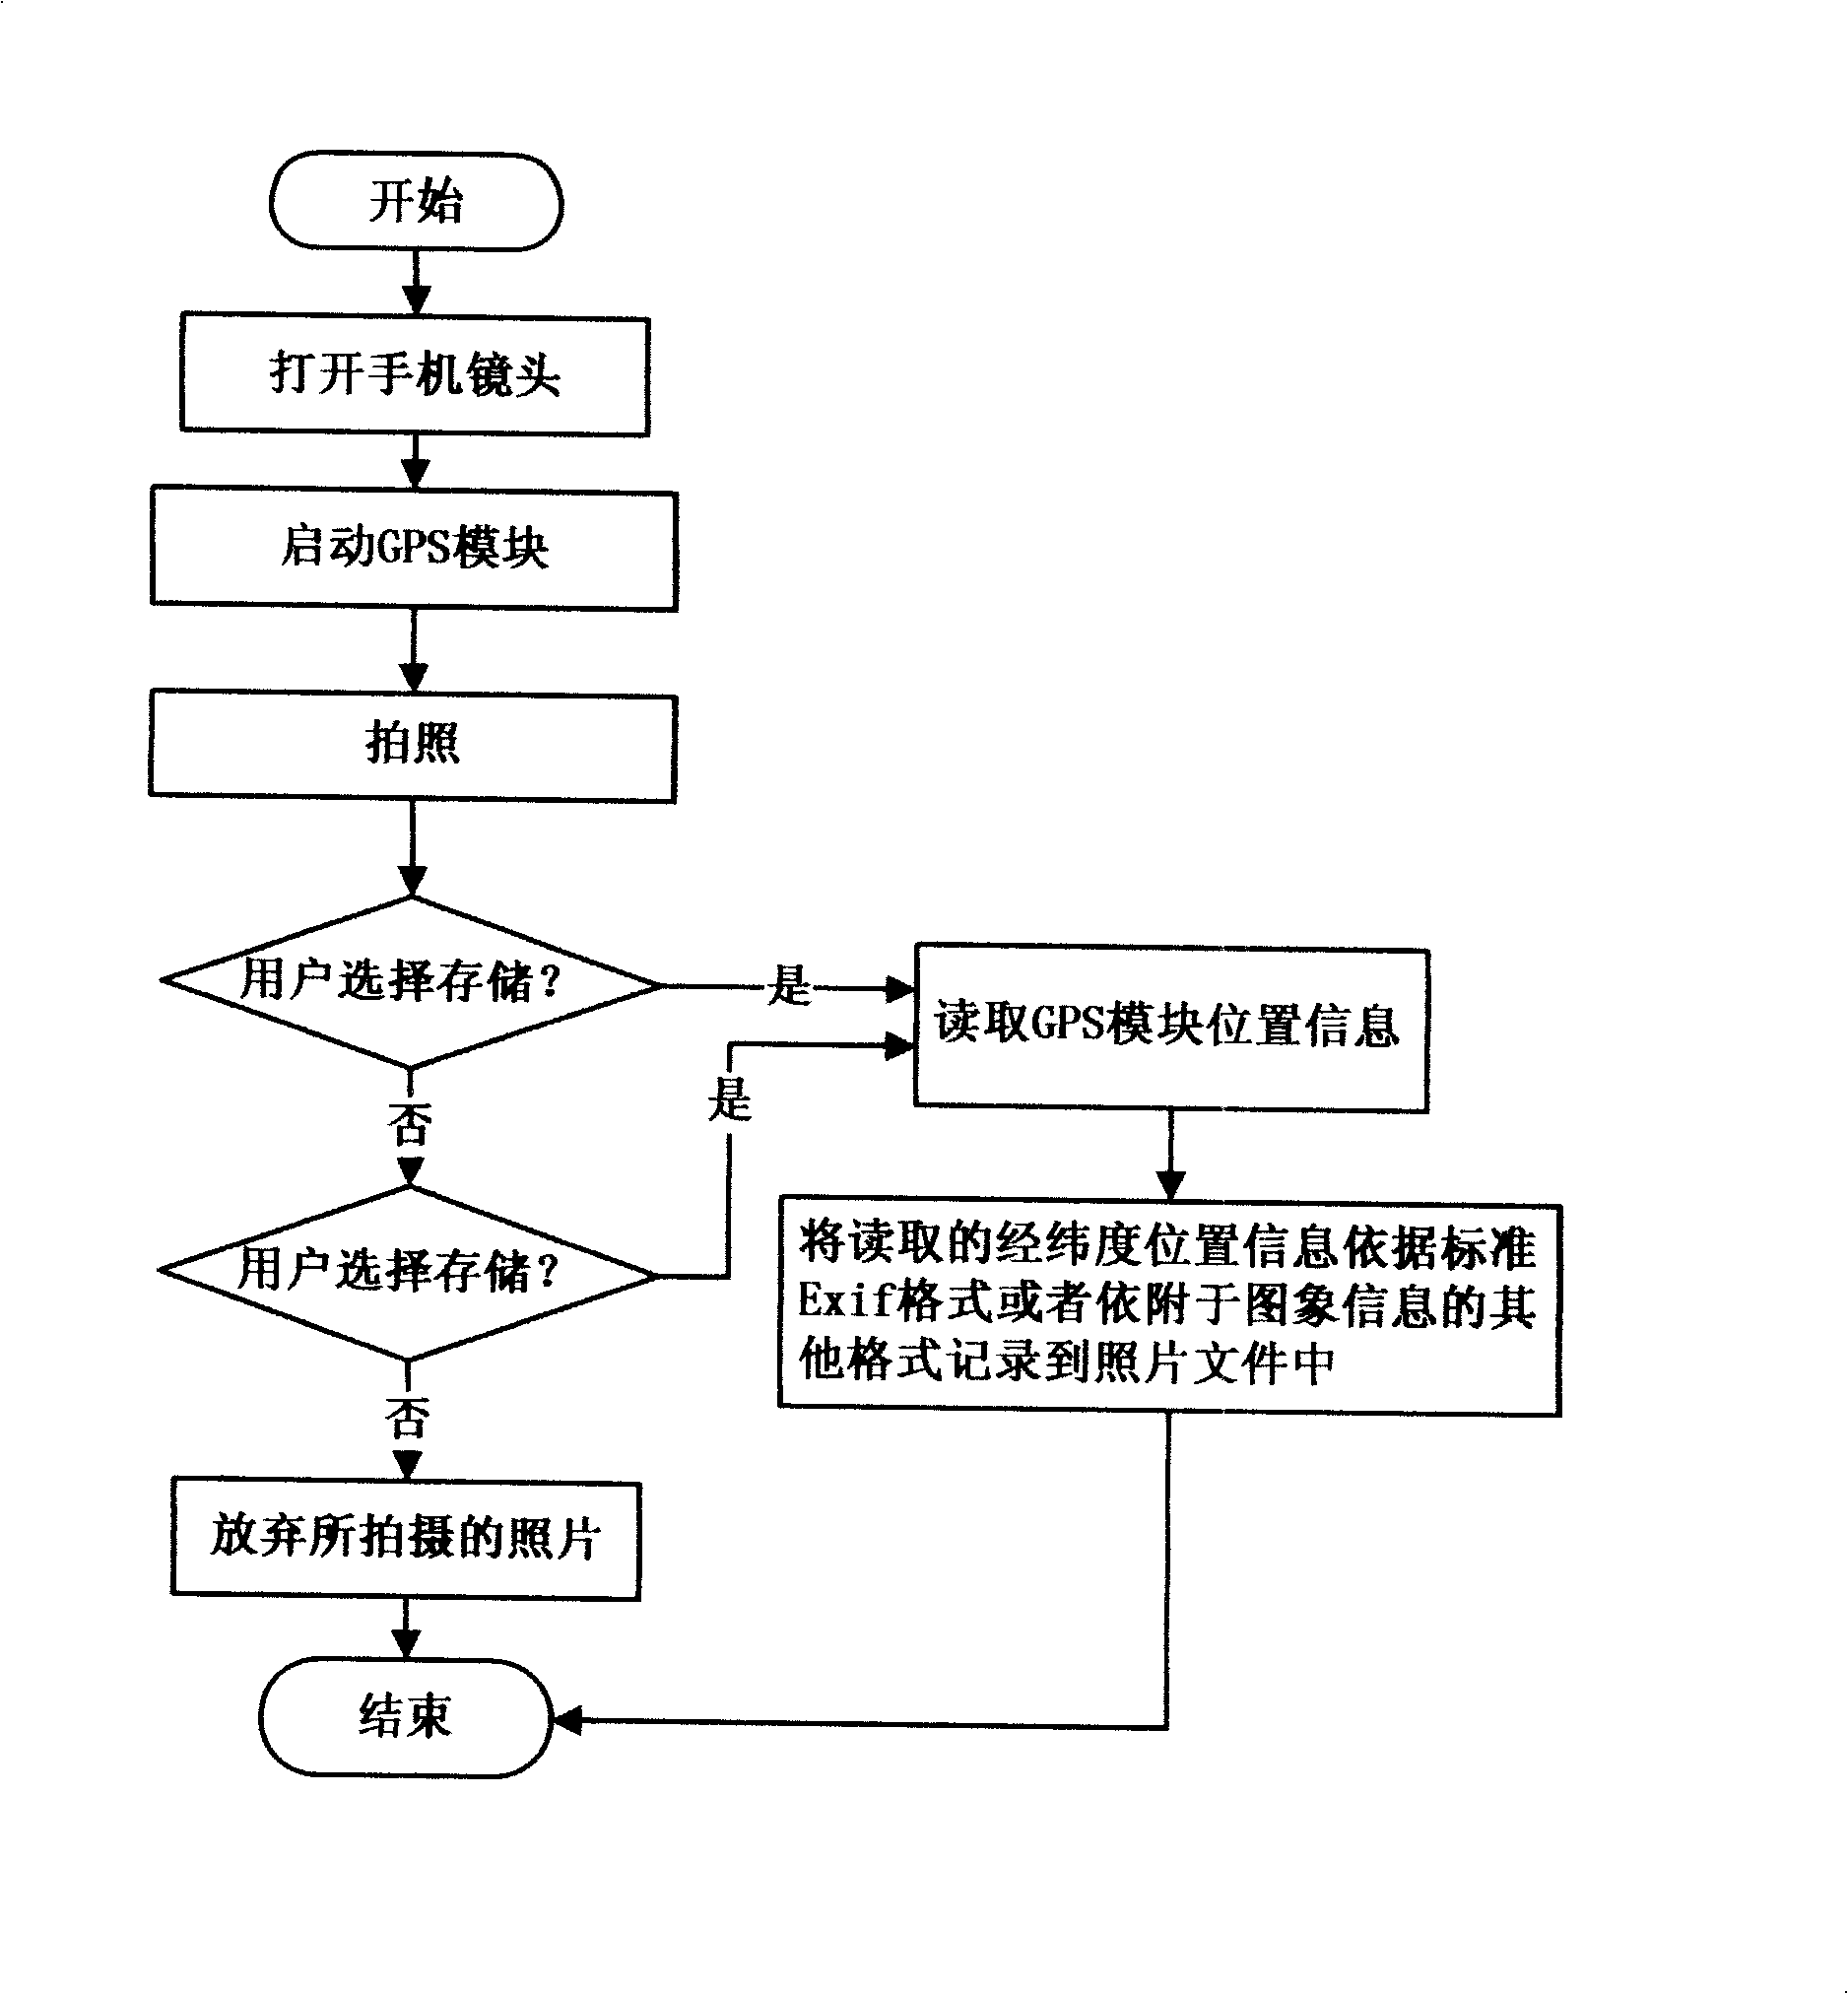 Method for implementing navigation by photograph based on mobile phone